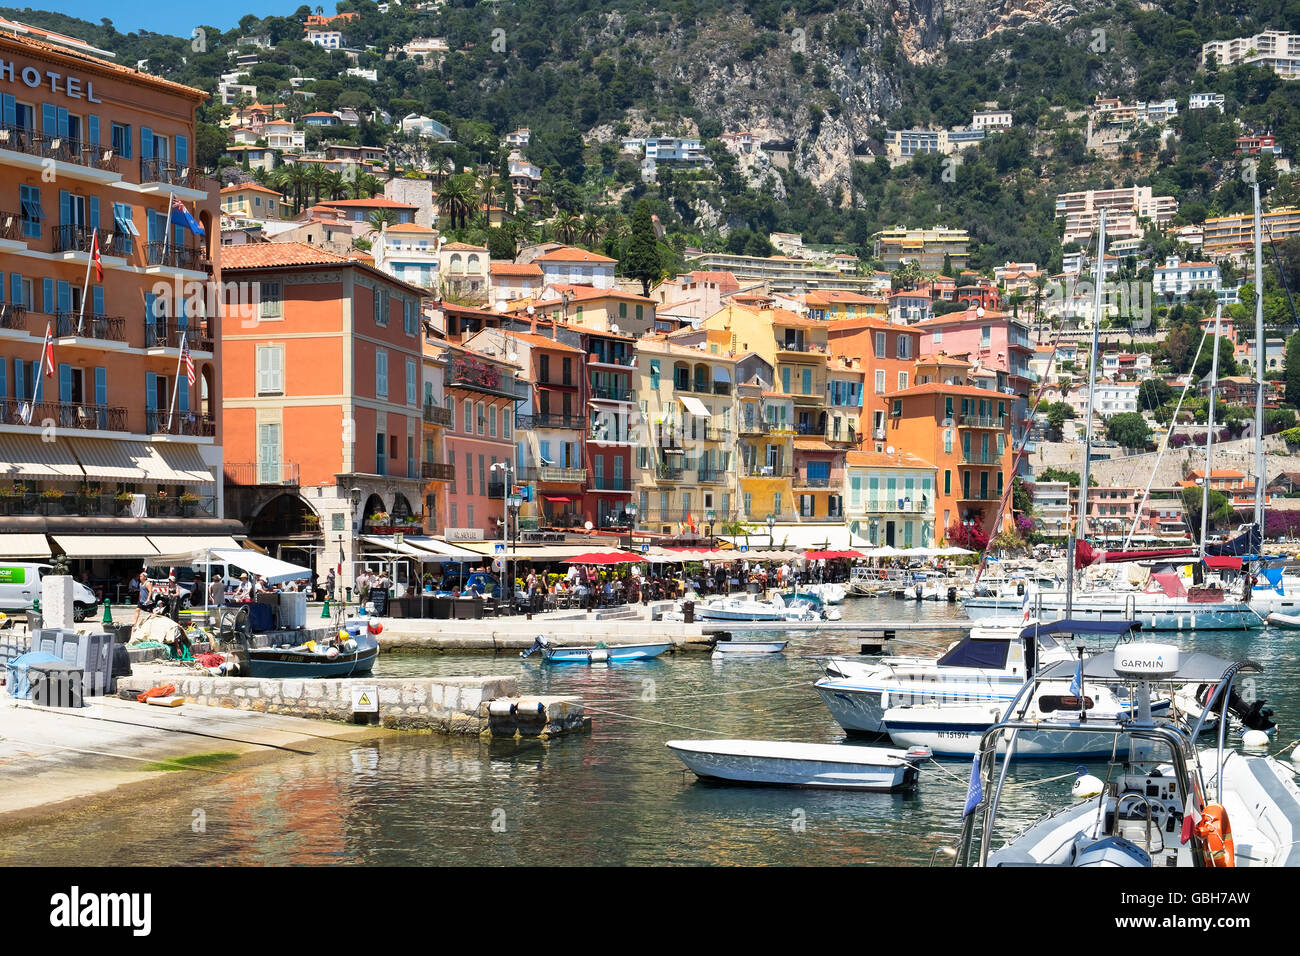 The marina at Villefranche-sur-Mer, Cote d'Azur, French Riviera, France Stock Photo